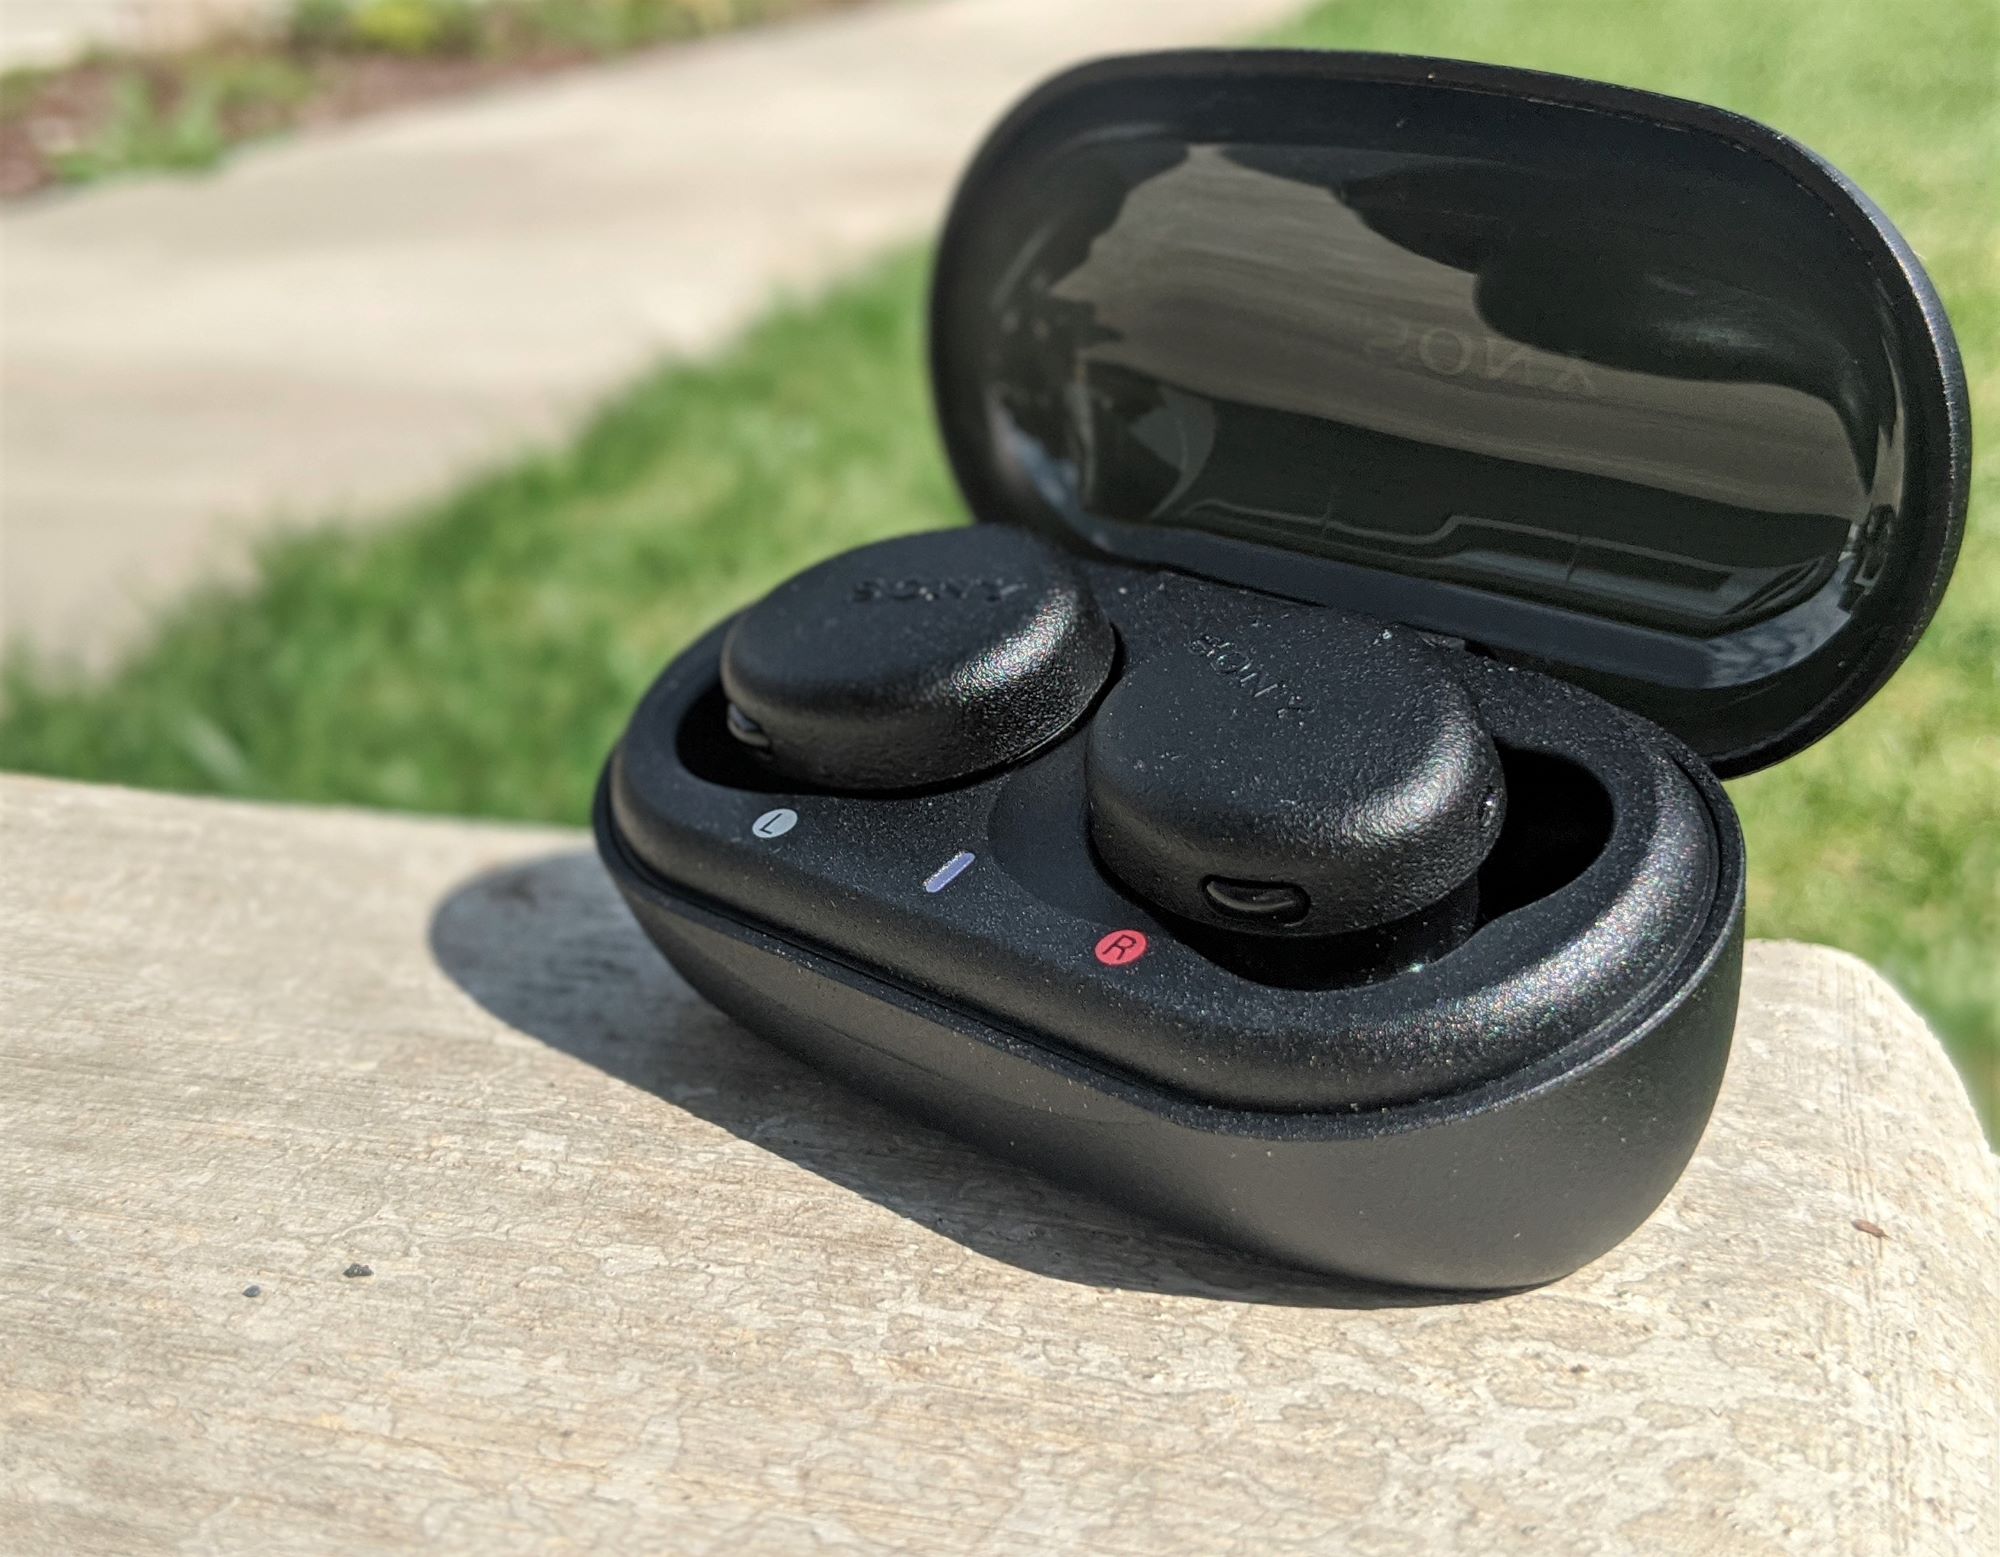 Sony WF-XB700 Earbuds Review: Affordable, Quirky Fun | Digital Trends